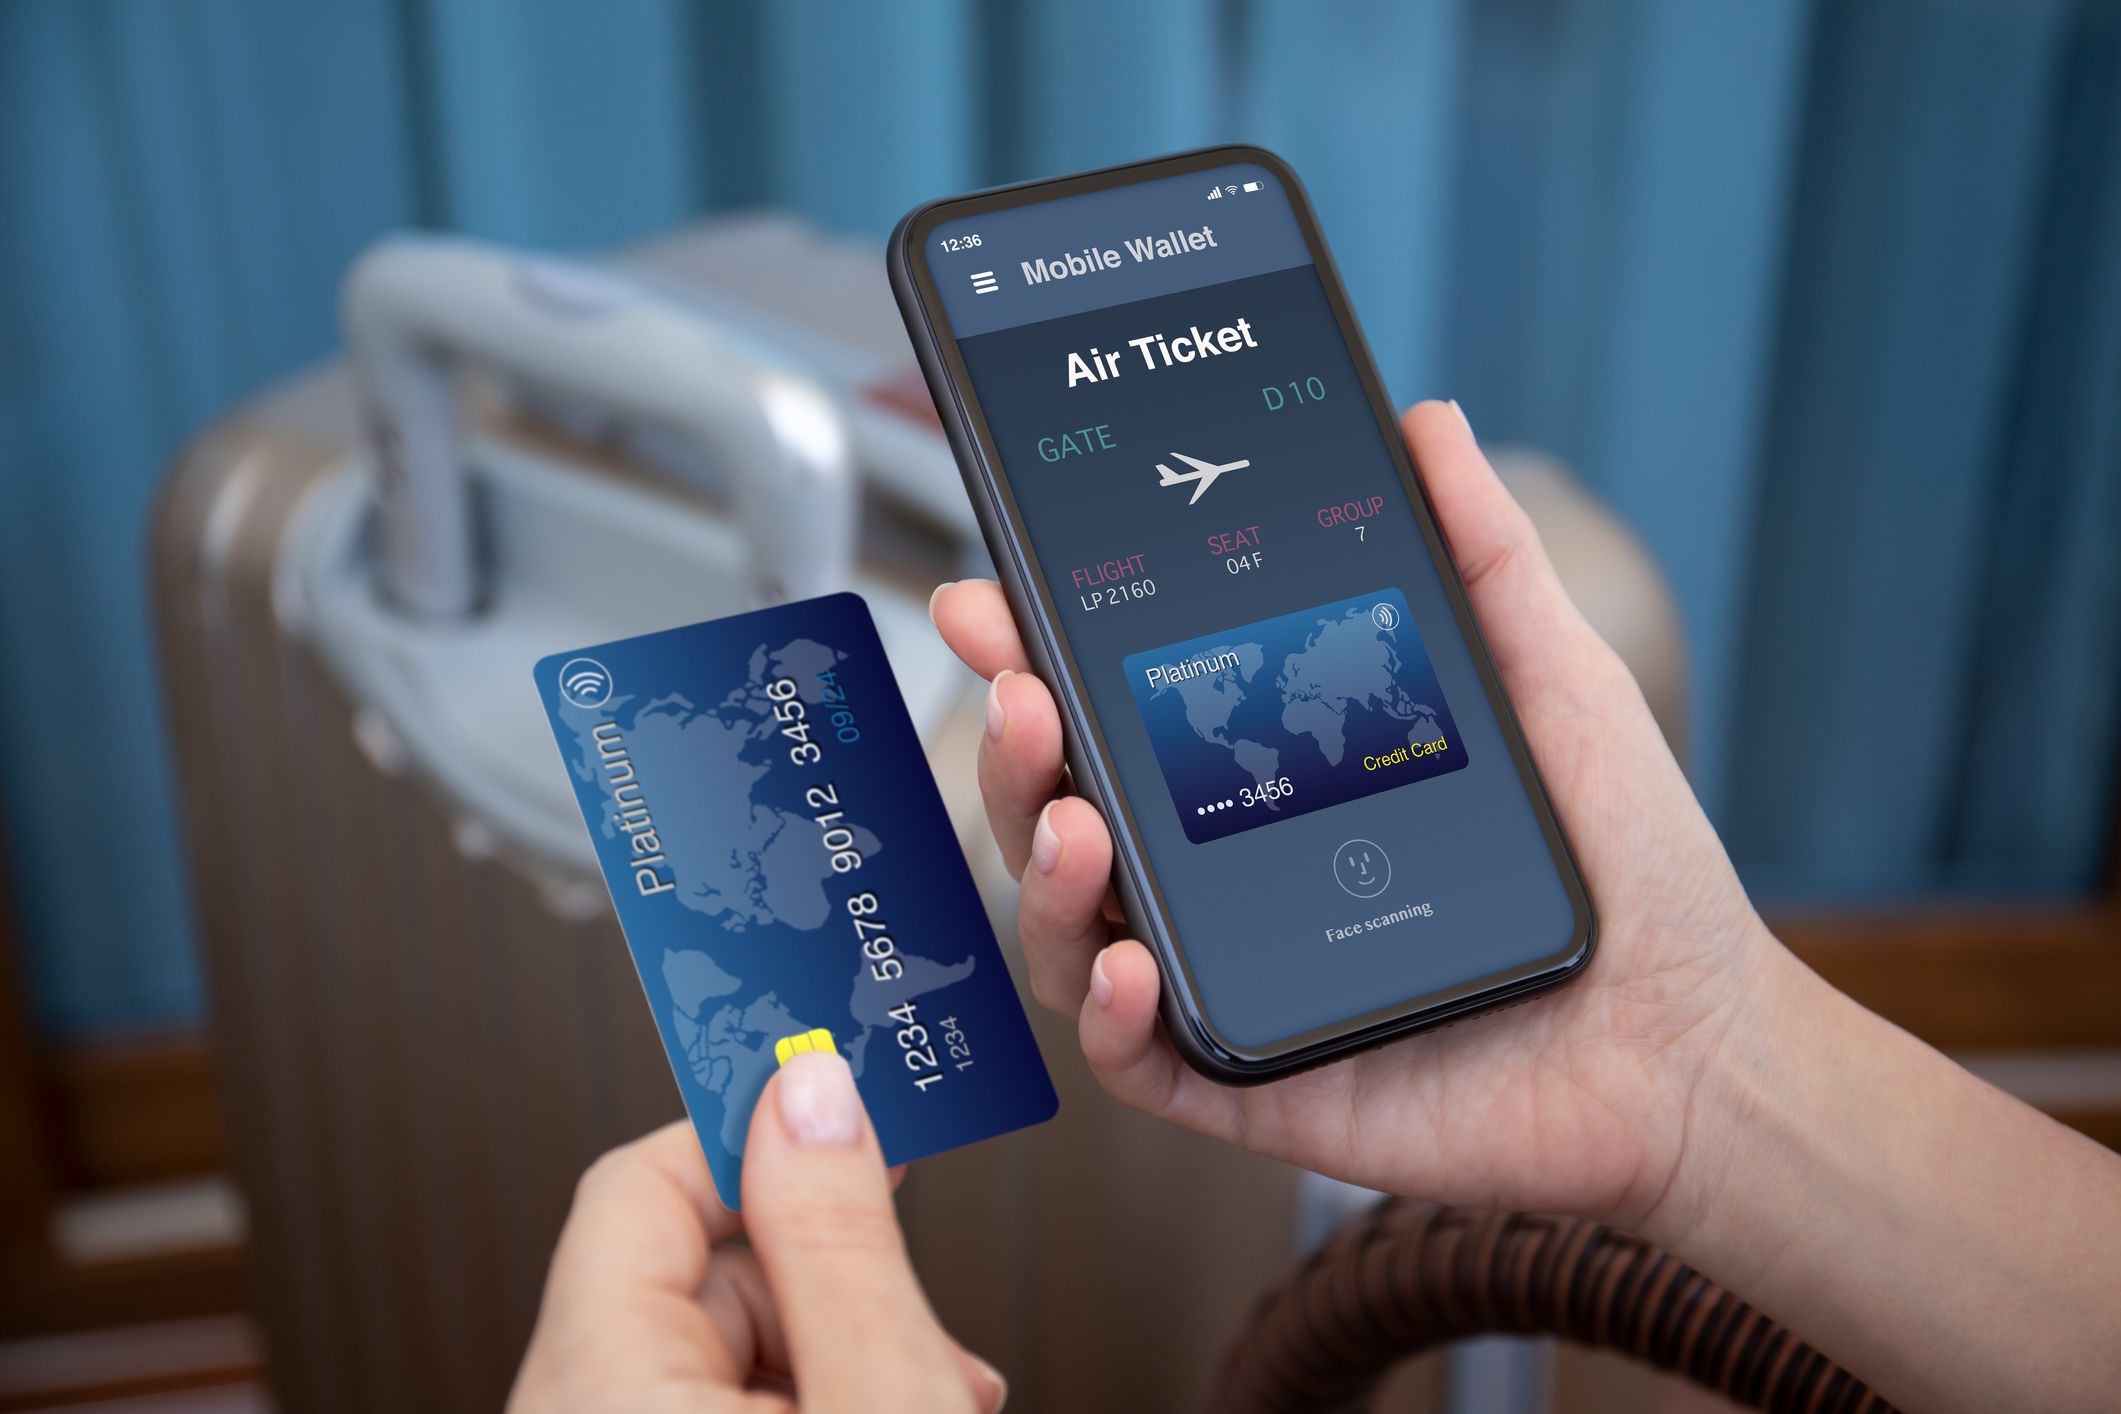 <h1><a href="https://www.msn.com/en-us/travel/news/4-ways-travel-credit-cards-can-really-save-you-big-on-your-next-vacation/ss-AA19dn7t">4 ways travel credit cards can really save you big on your next vacation</a></h1>